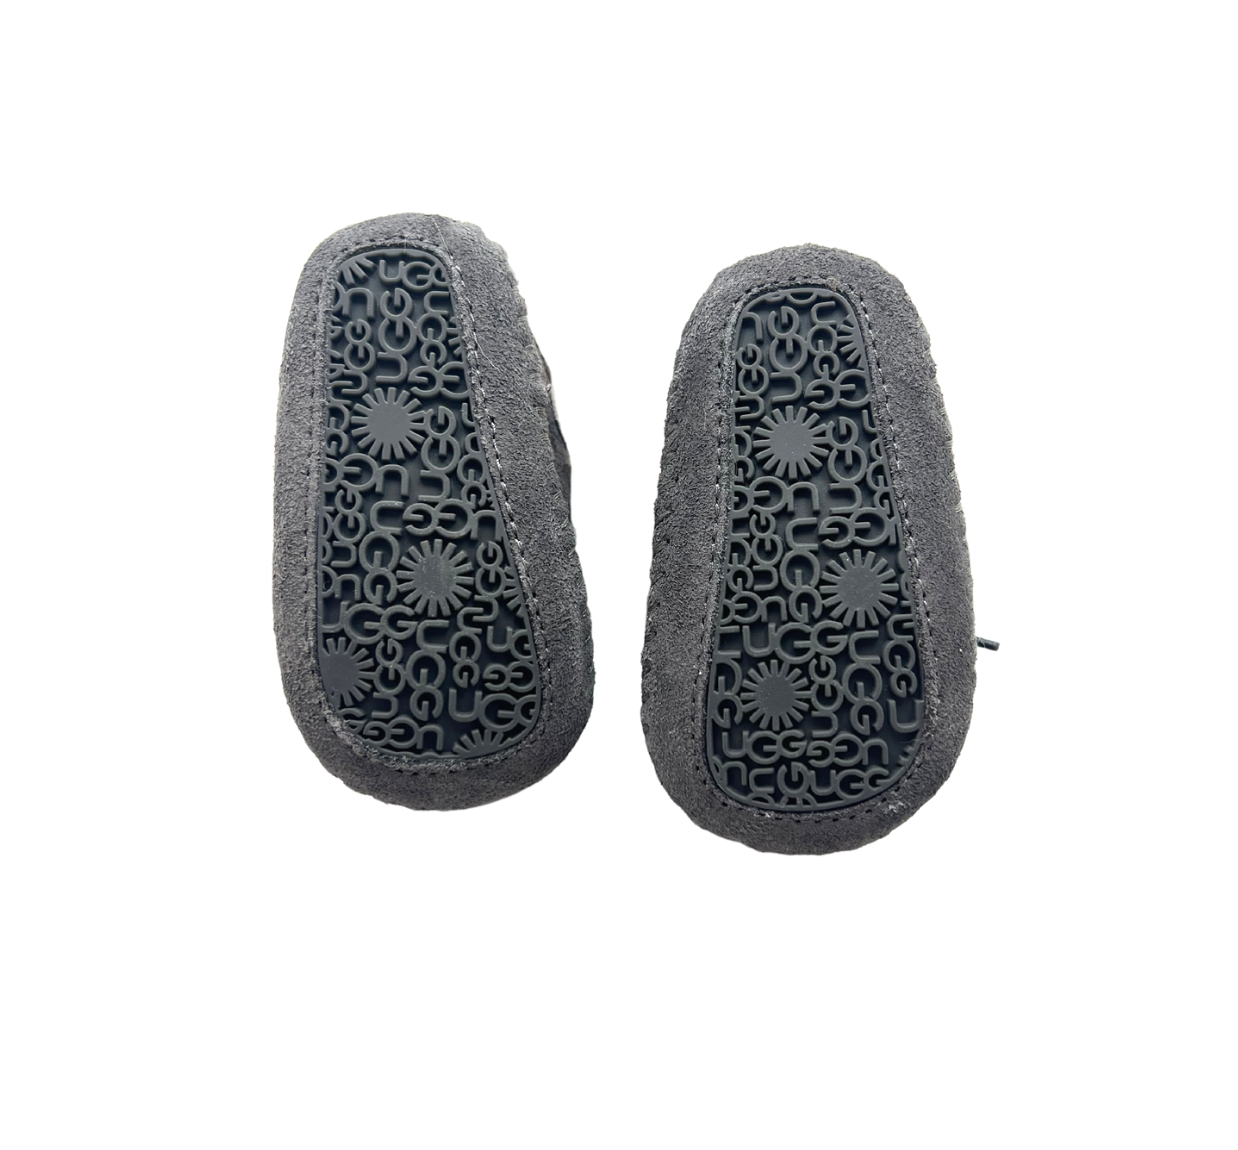 UGG - Gray lined slippers - 0/6 months